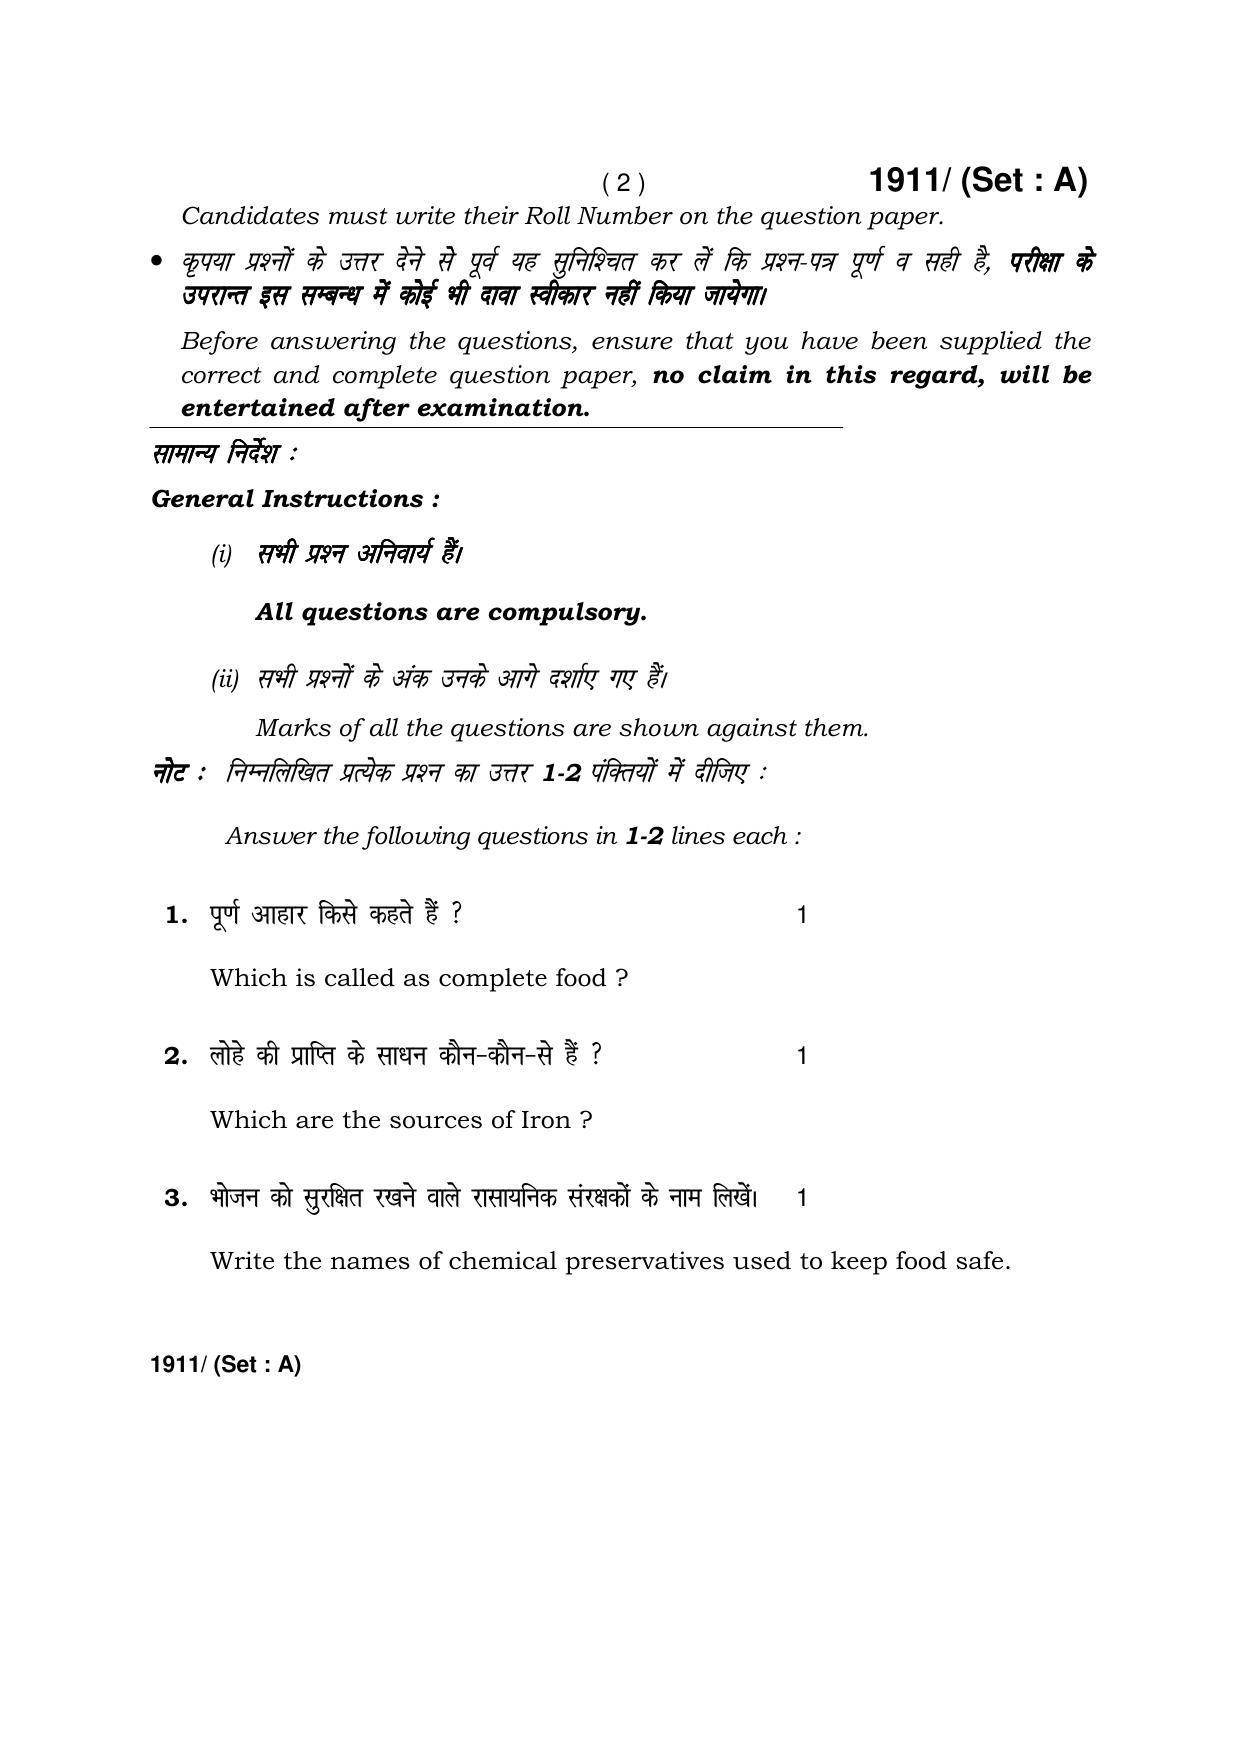 Haryana Board HBSE Class 10 Home Science -A 2017 Question Paper - Page 2